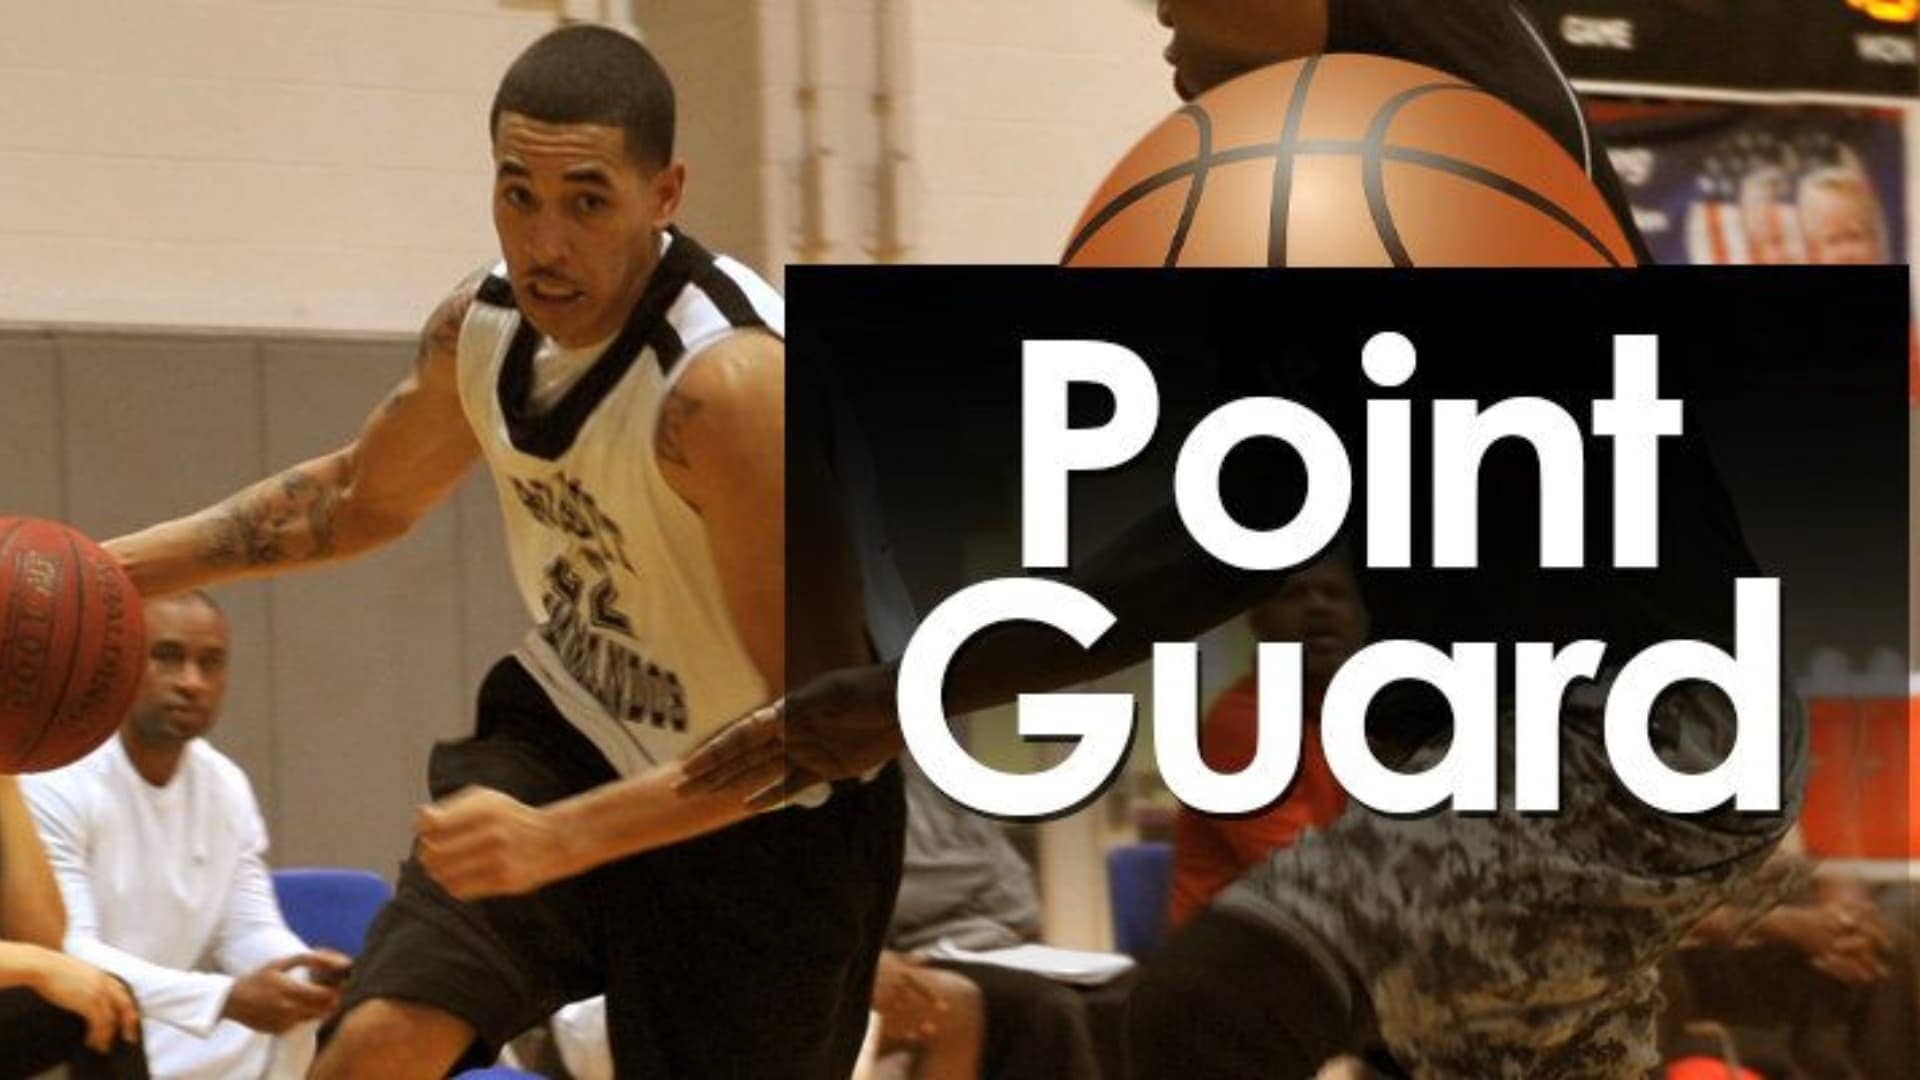 Point Guard- what are basketball positions